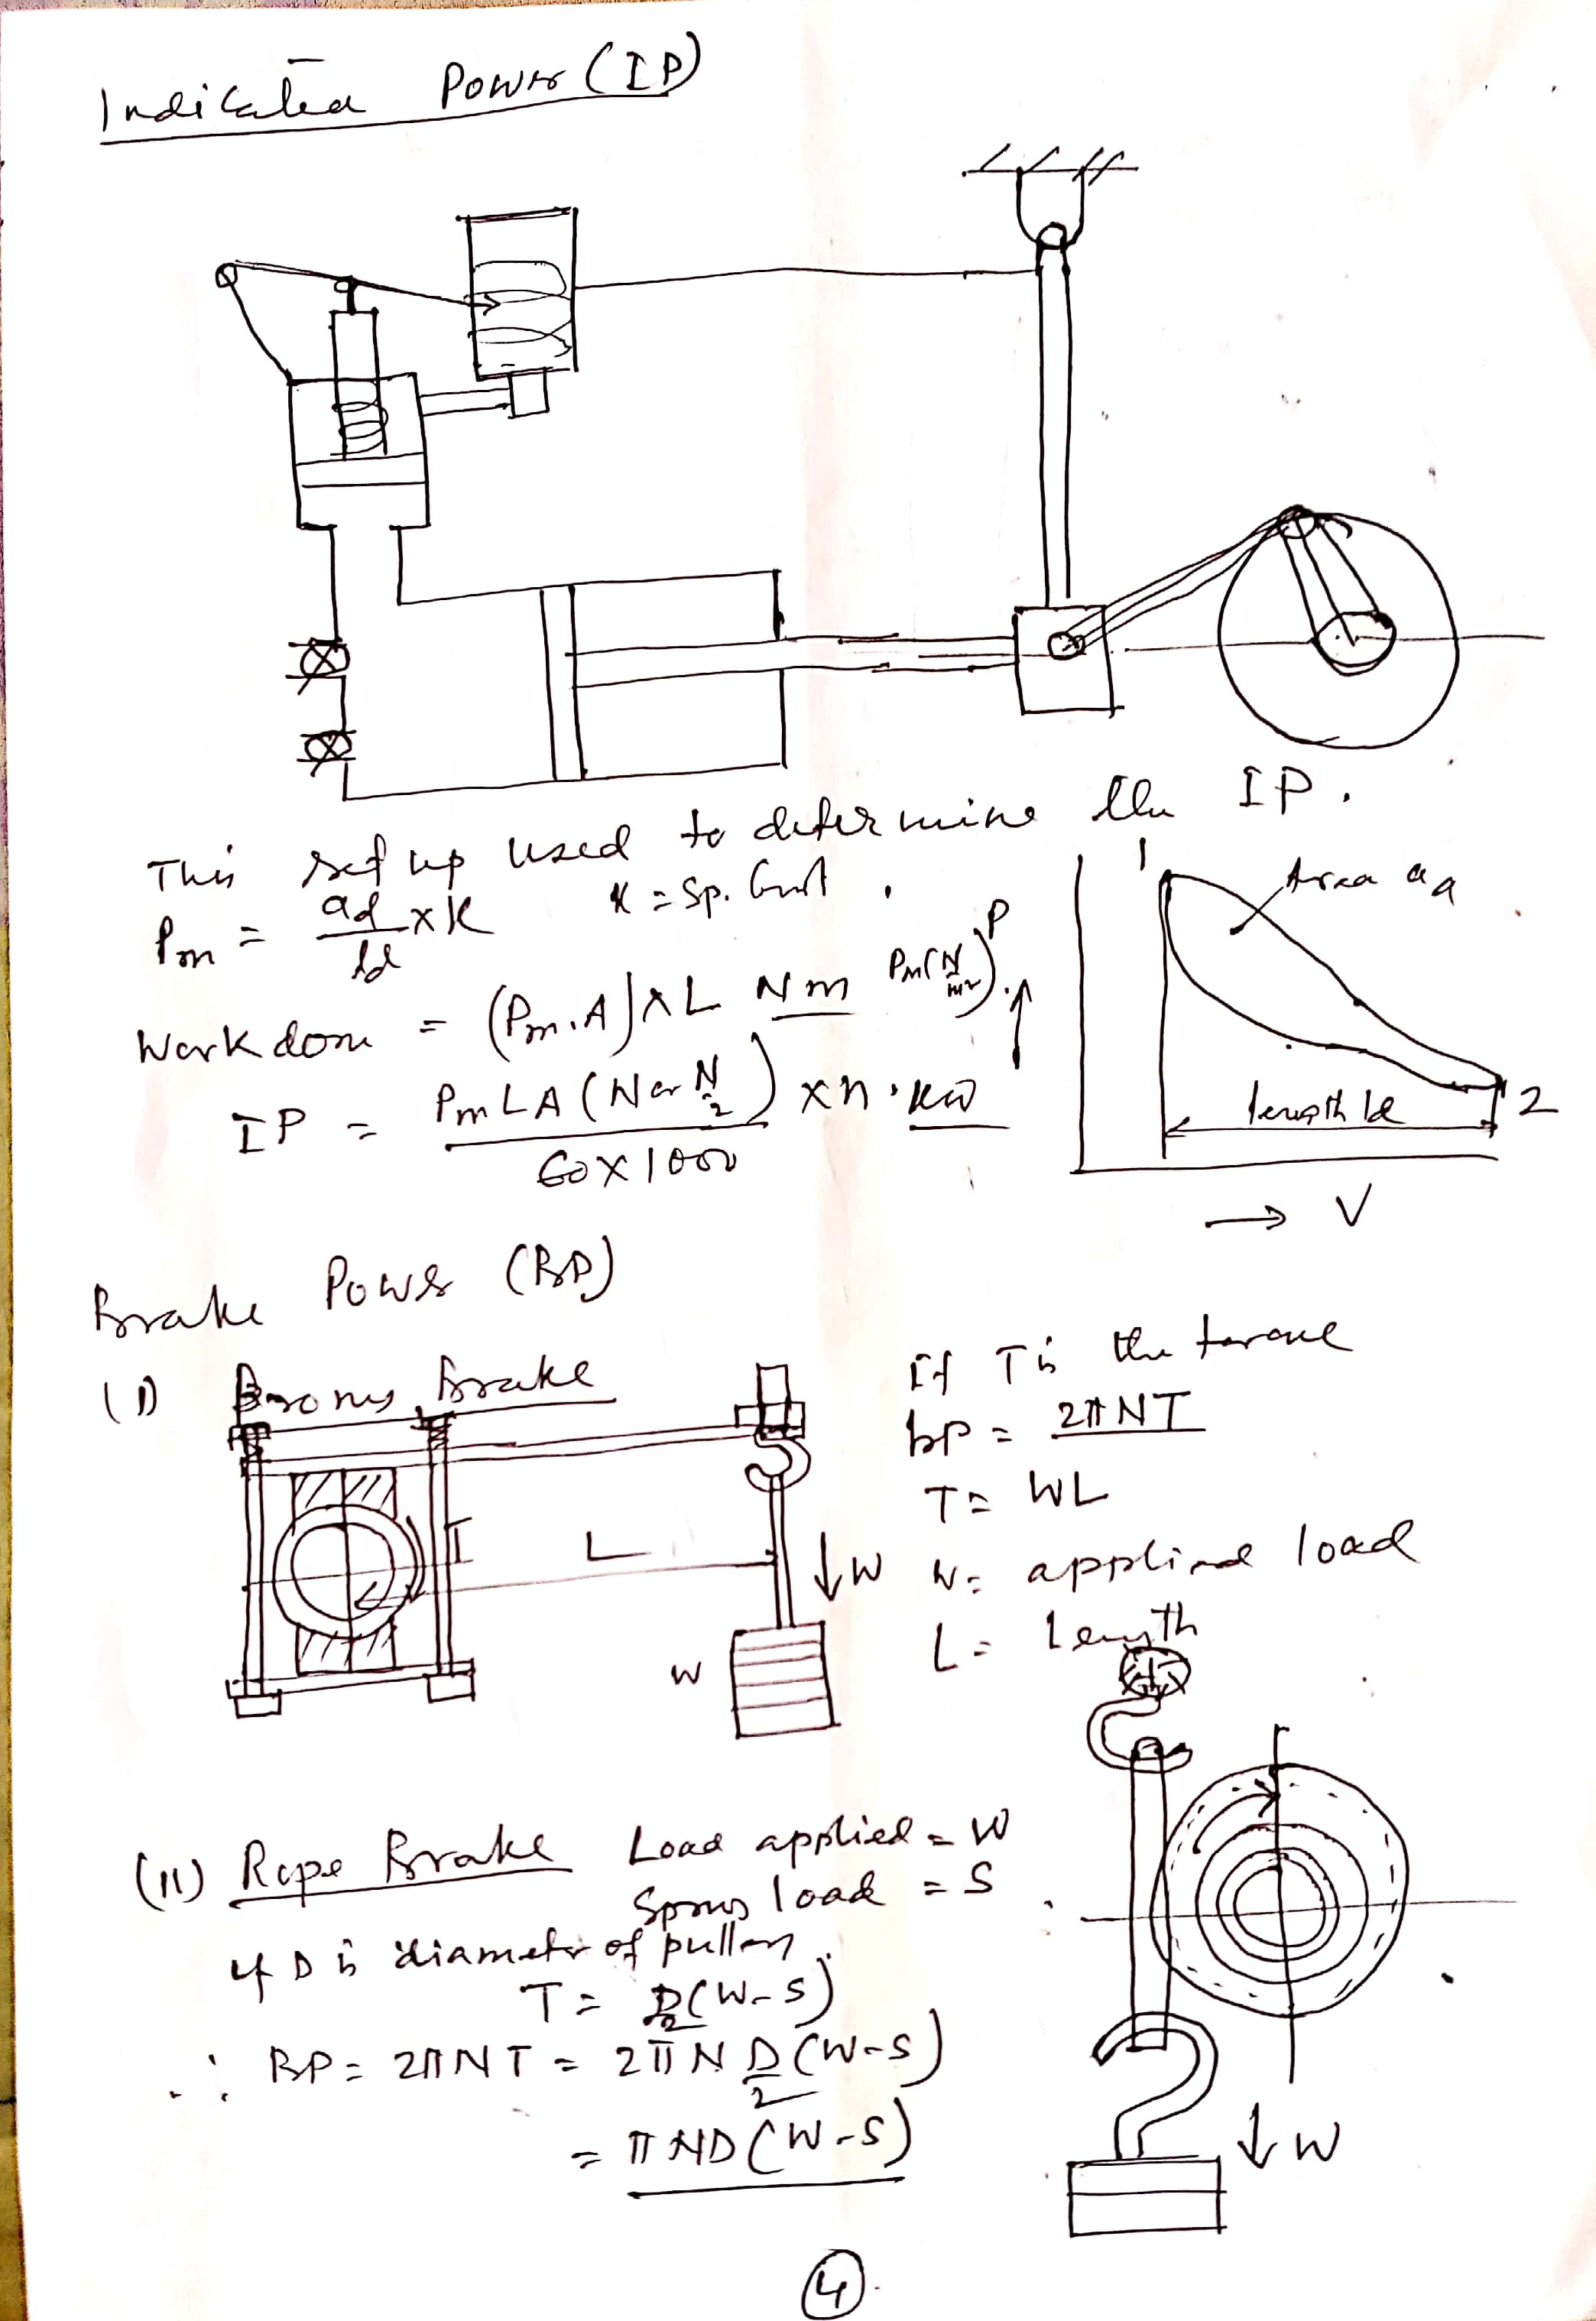  notes on Performance of IC engine-CamScanner 05-05-2020 14.32.32_4.jpg